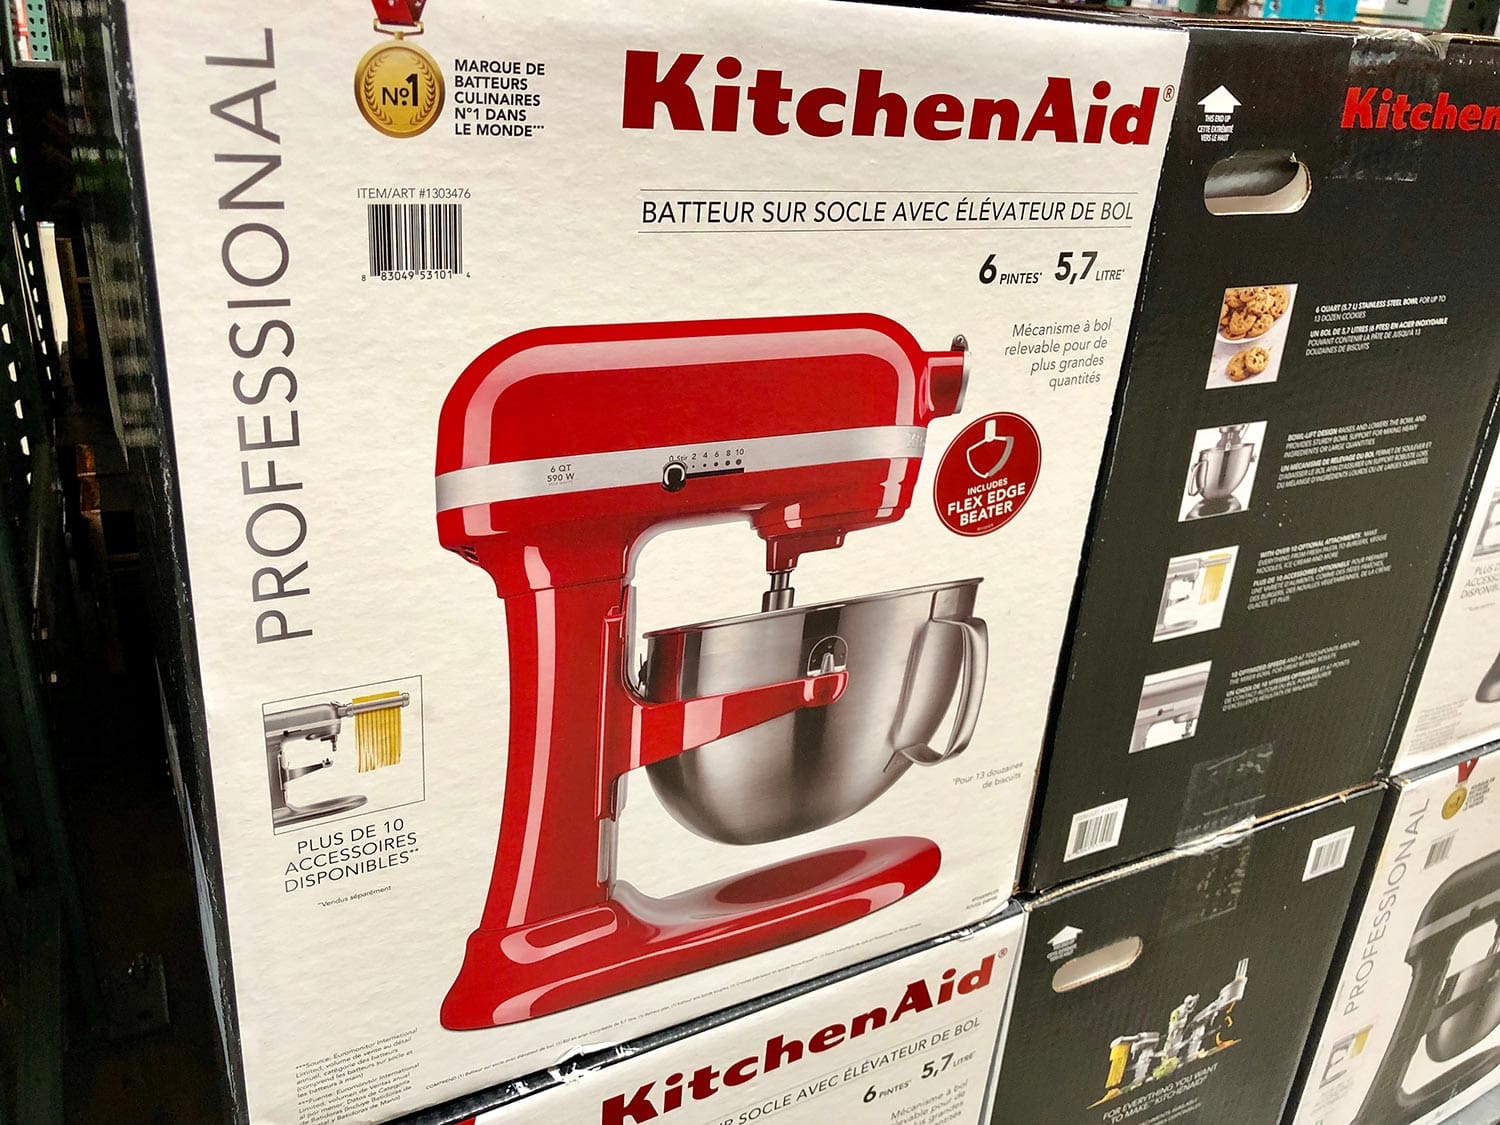 New KitchenAid food mixer in red for display at a large department store